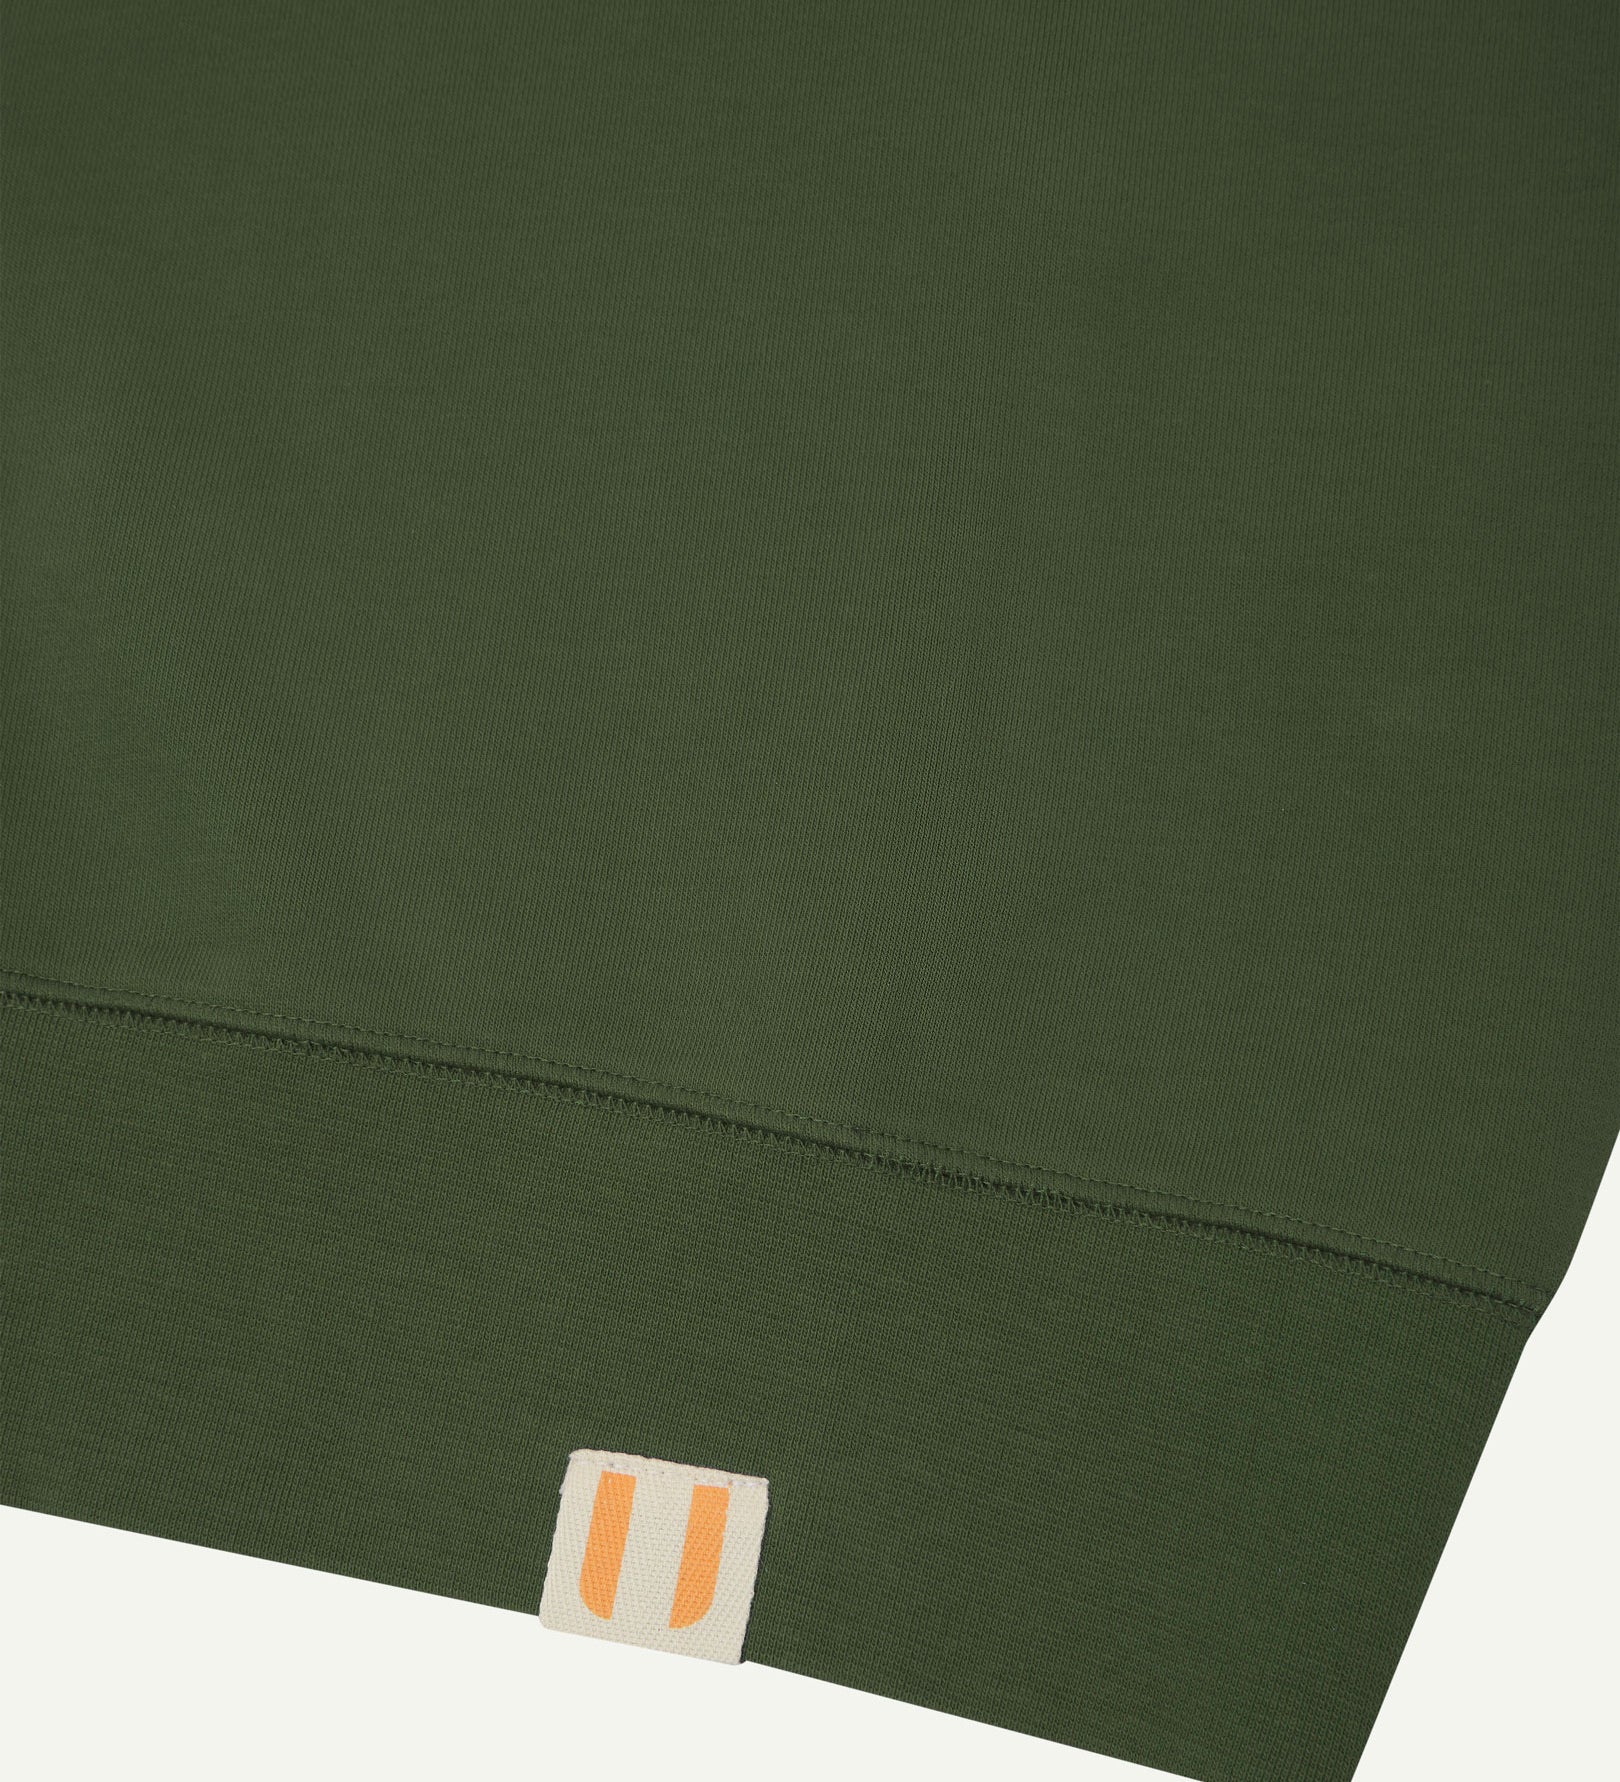 Closer view view of the discreet brand logo on ribbed hem of the Uskees coriander-green organic heavyweight cotton 7005 jersey sweatshirt.